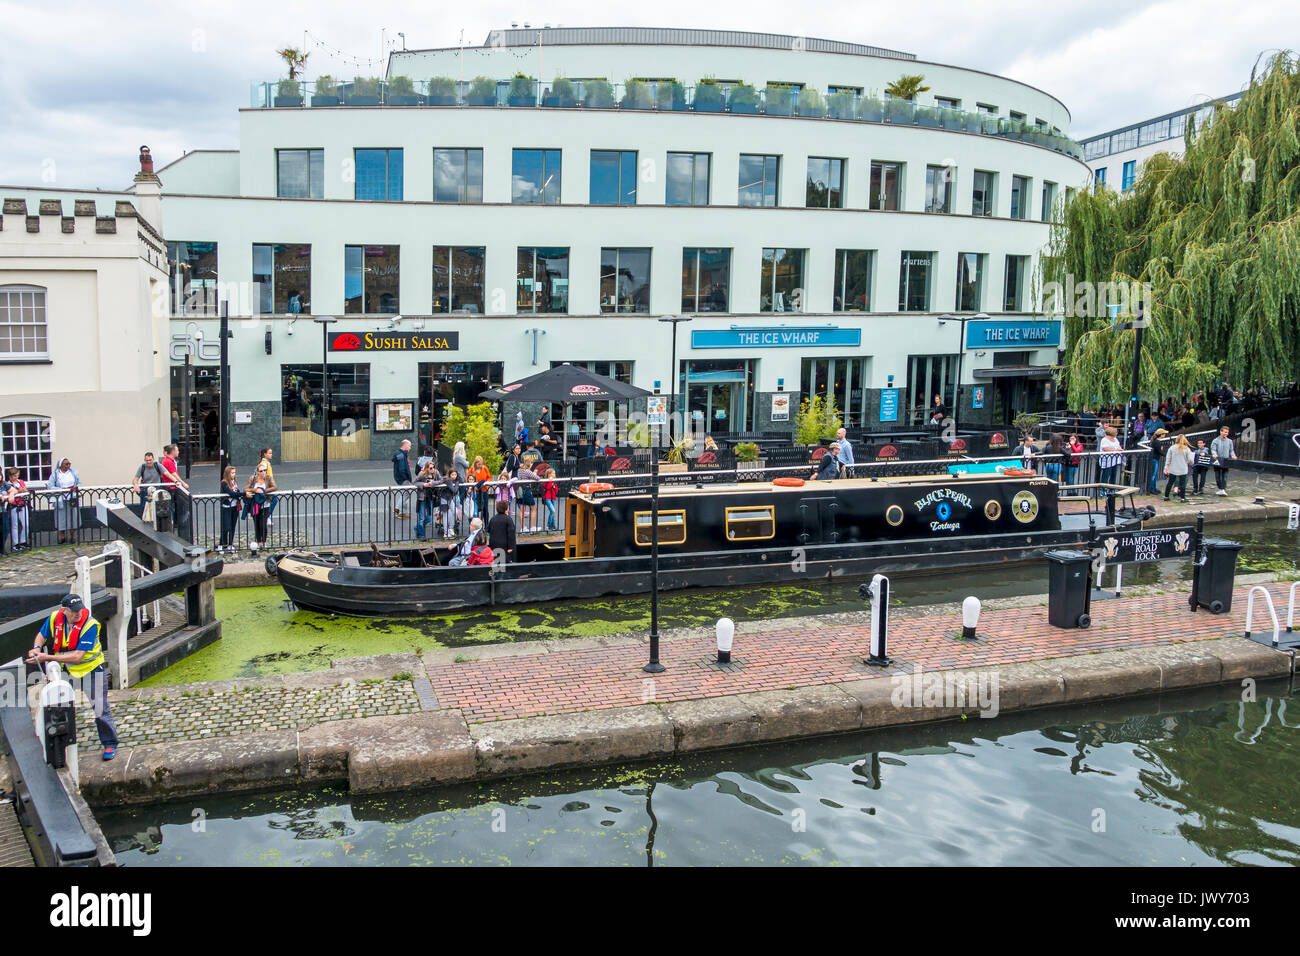 Wetherspoon,l'Ice Wharf Sushi,Salsa,RESTAURANT,Hampstead Road,Serrure,Camden Regents Canal,London,UK Banque D'Images